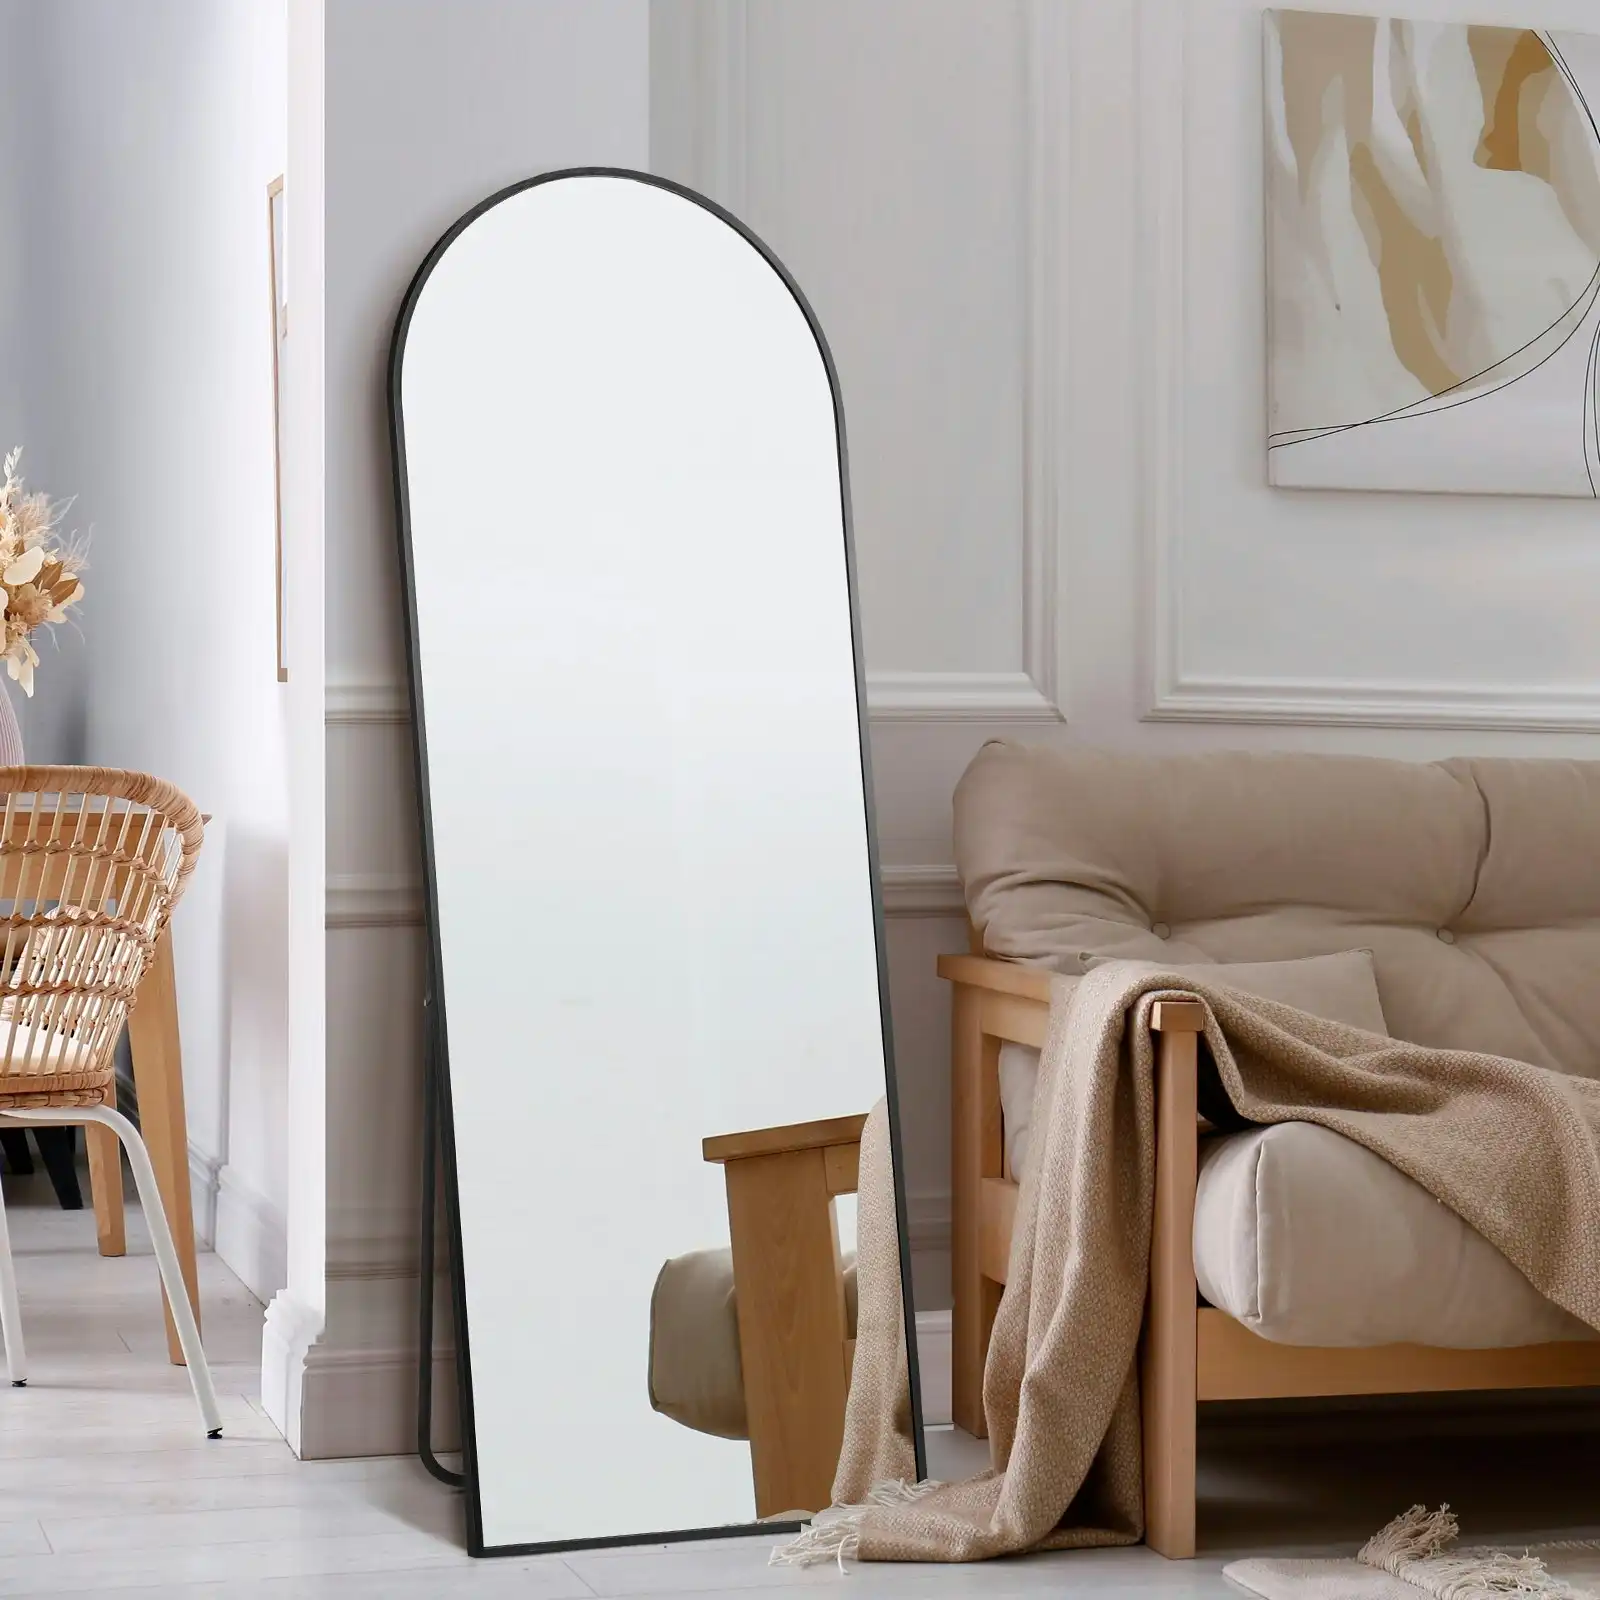 Oikiture 166x60cm Full Length Mirror Arched Dressing Floor Mirrors Free Standing Black